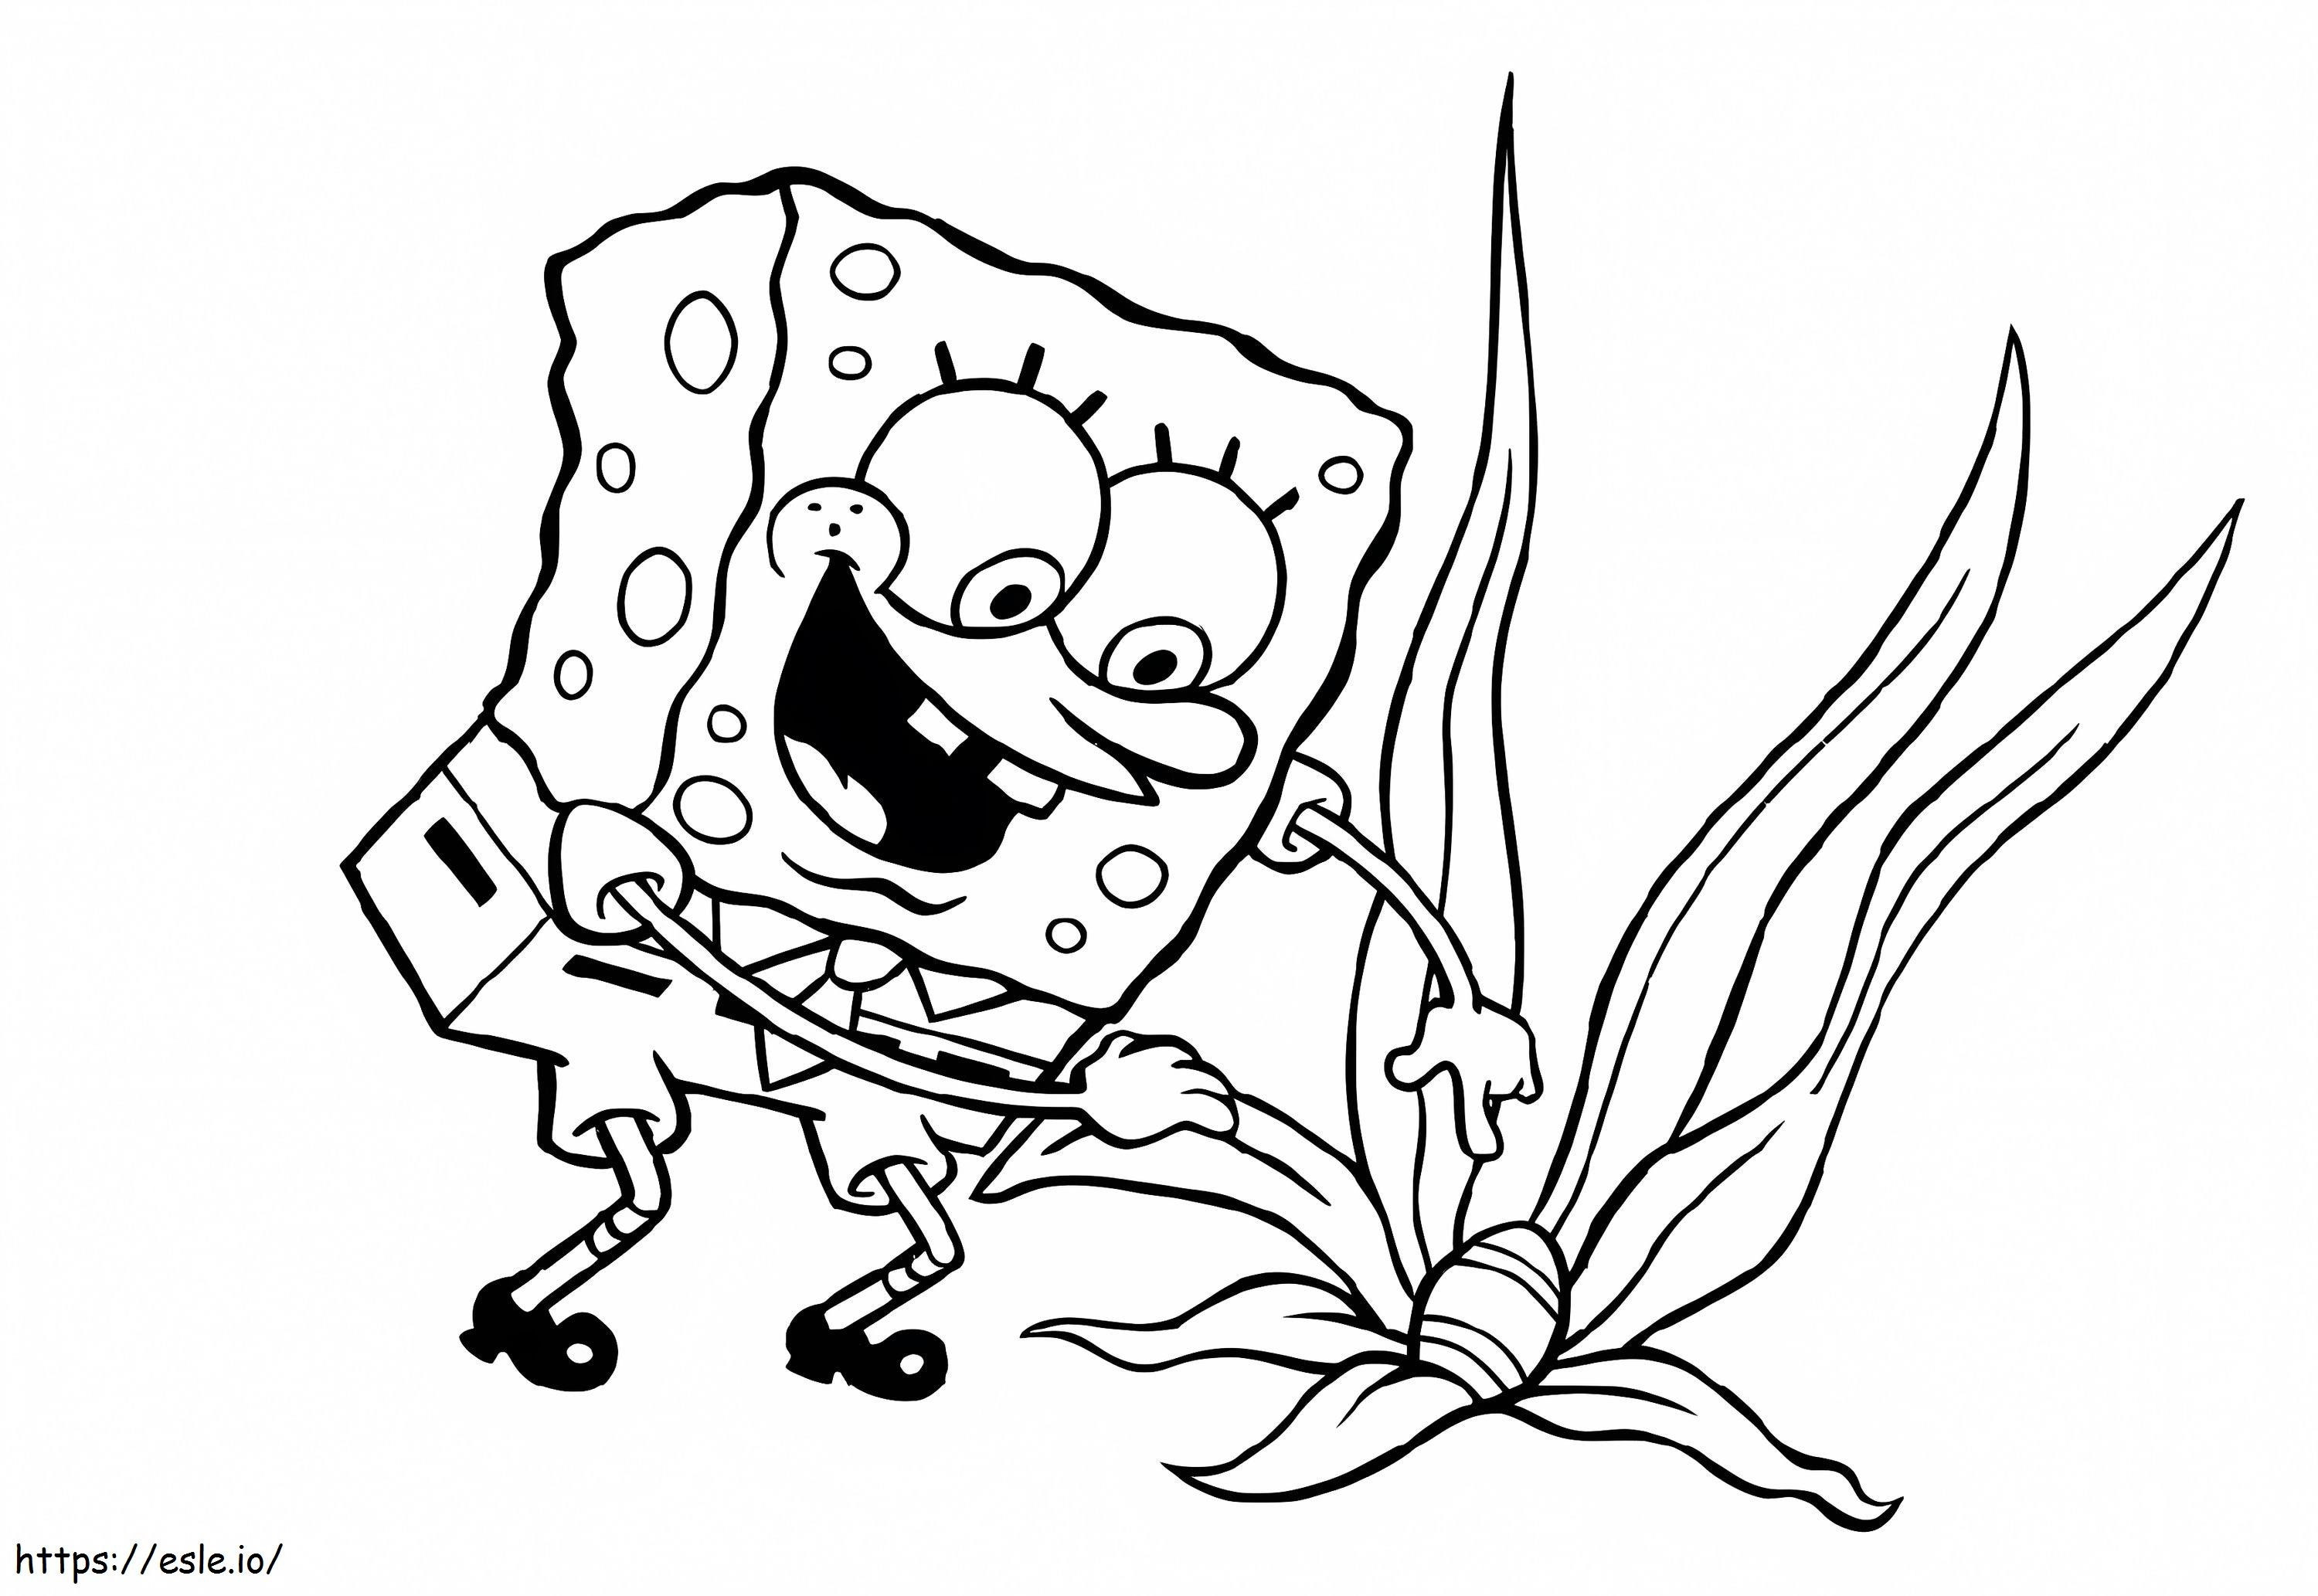 Spongebob And Egg coloring page